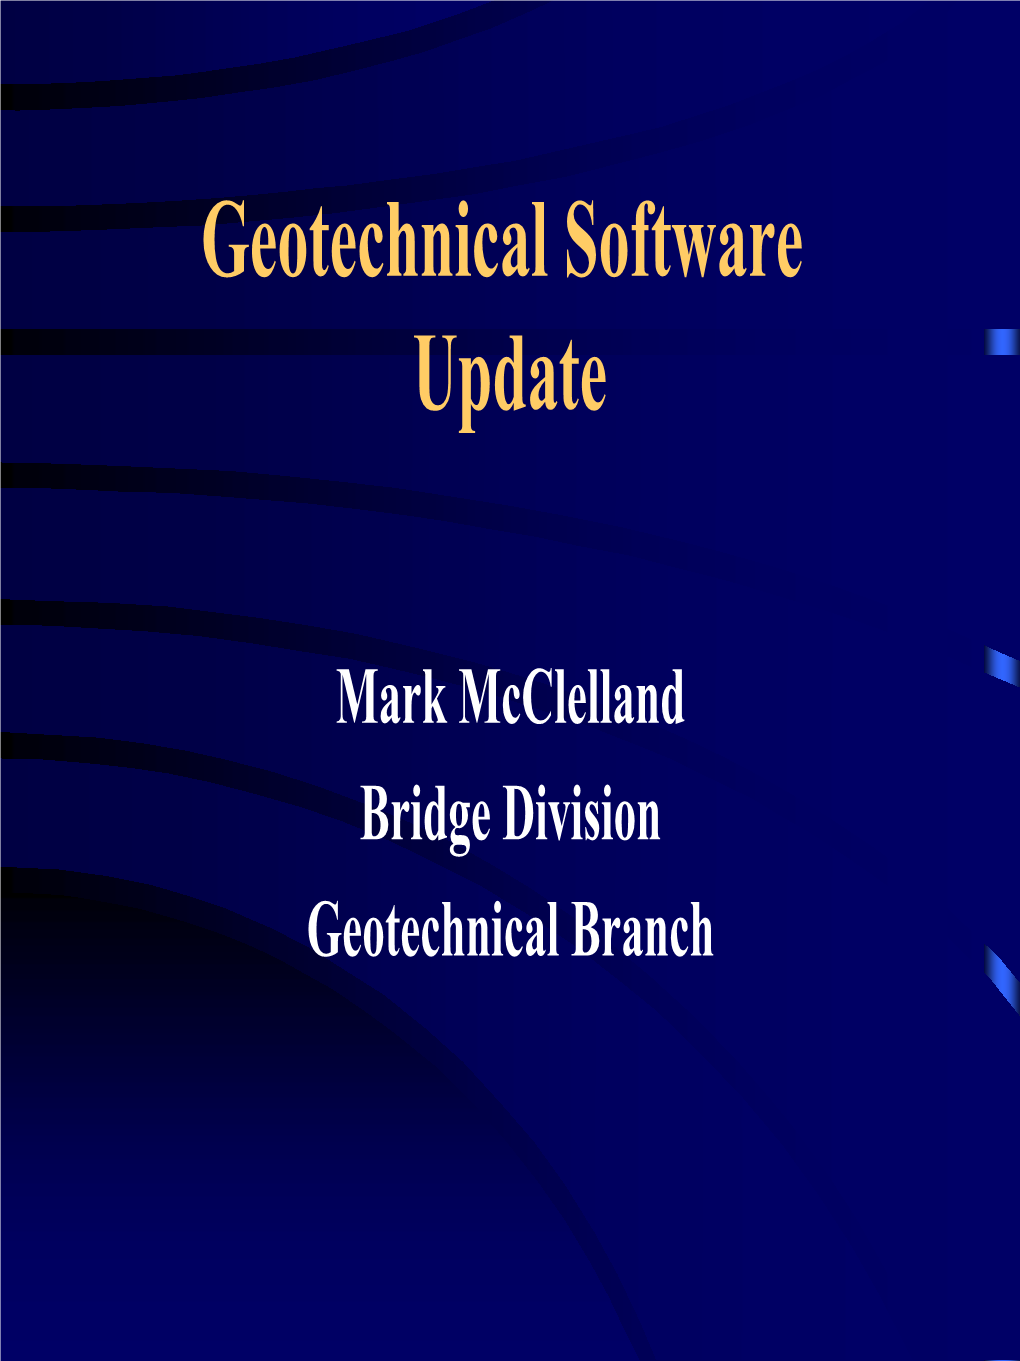 Geotechnical Software Update